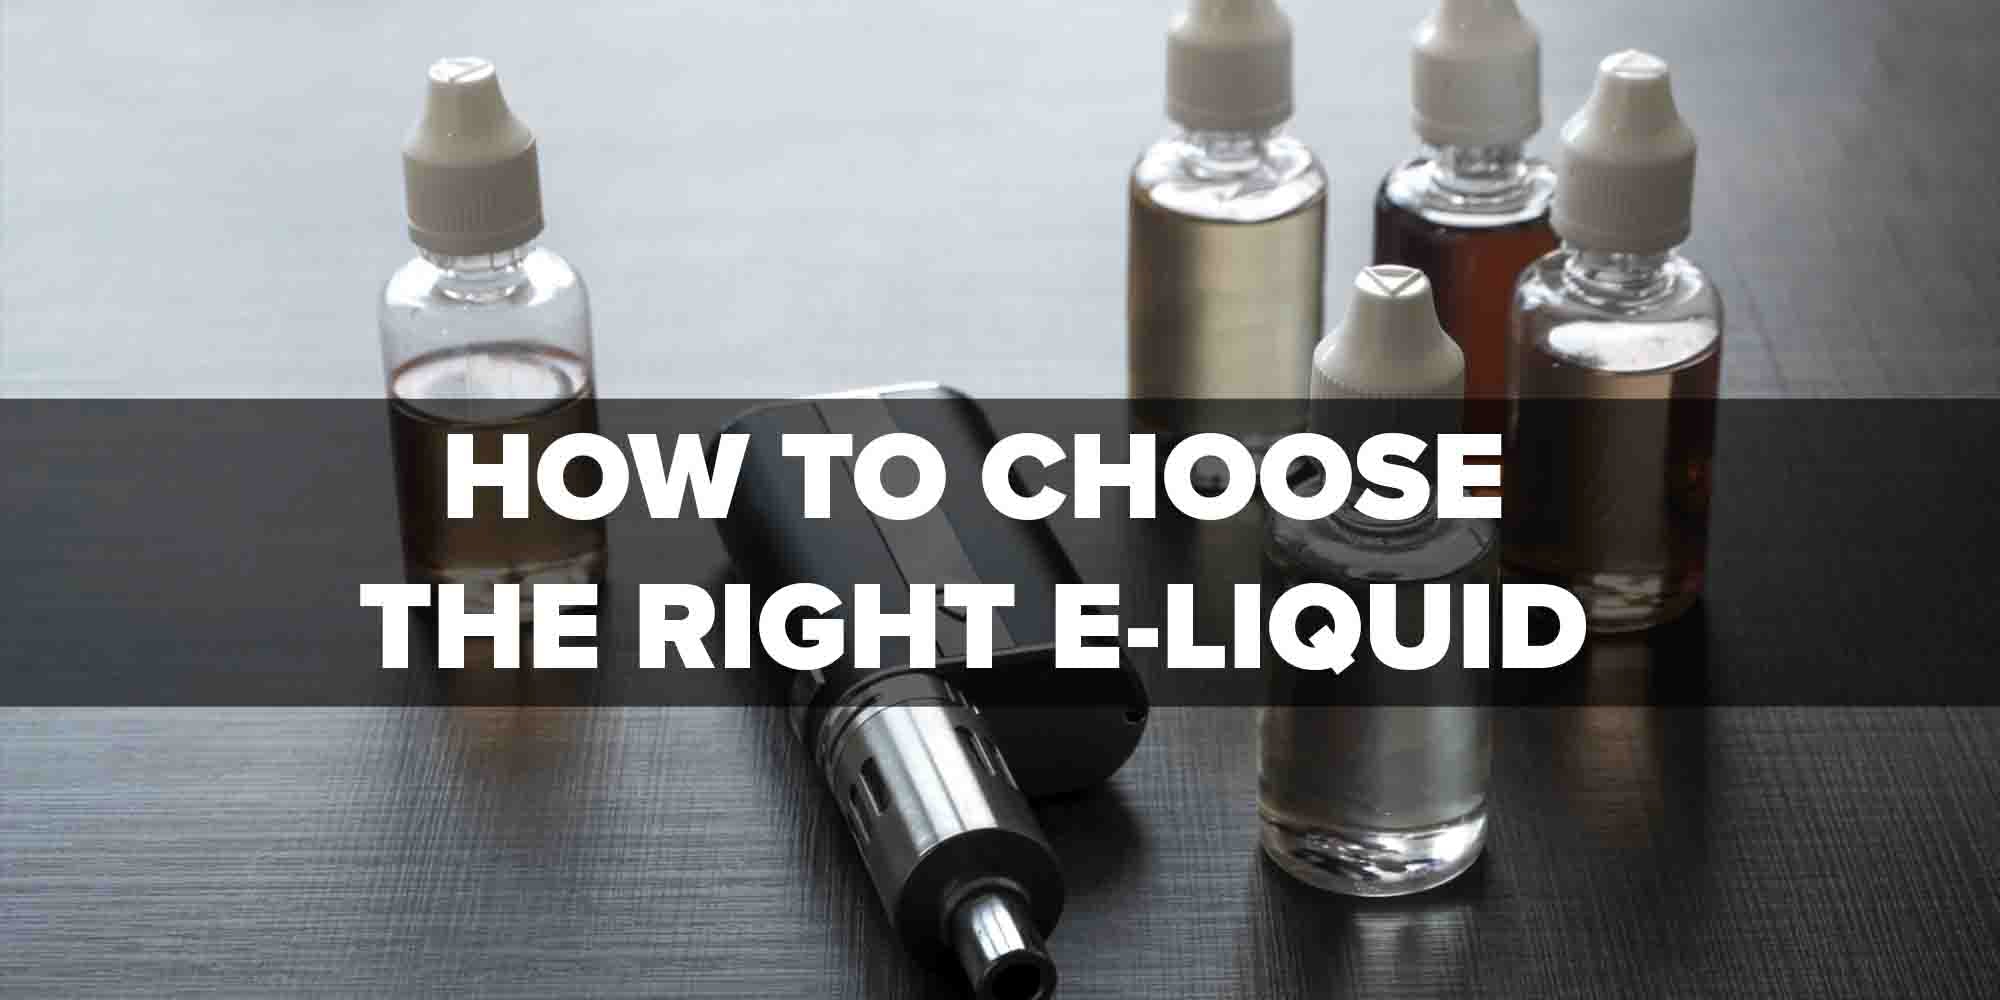 Determine the Different Types of E-liquids to Choose the Right One